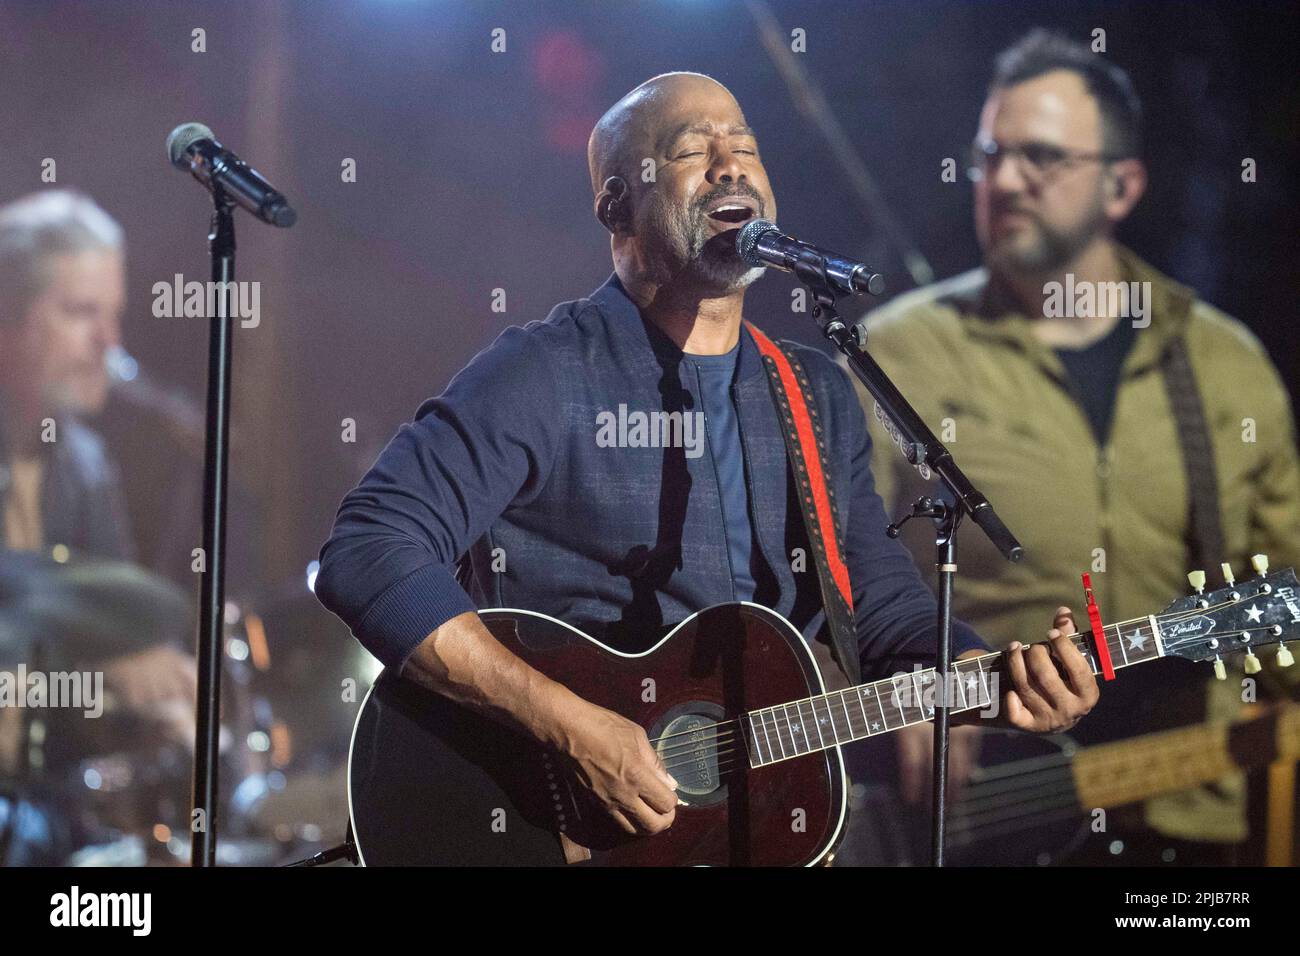 Austin Texas USA, March 31 2023: Country and pop singer DARIUS RUCKER (c) teams up with rock & roll band The Black Crowes for a taping of Country Music Television's (CMT) Crossroads in downtown Austin. Credit: Bob Daemmrich/Alamy Live News Stock Photo